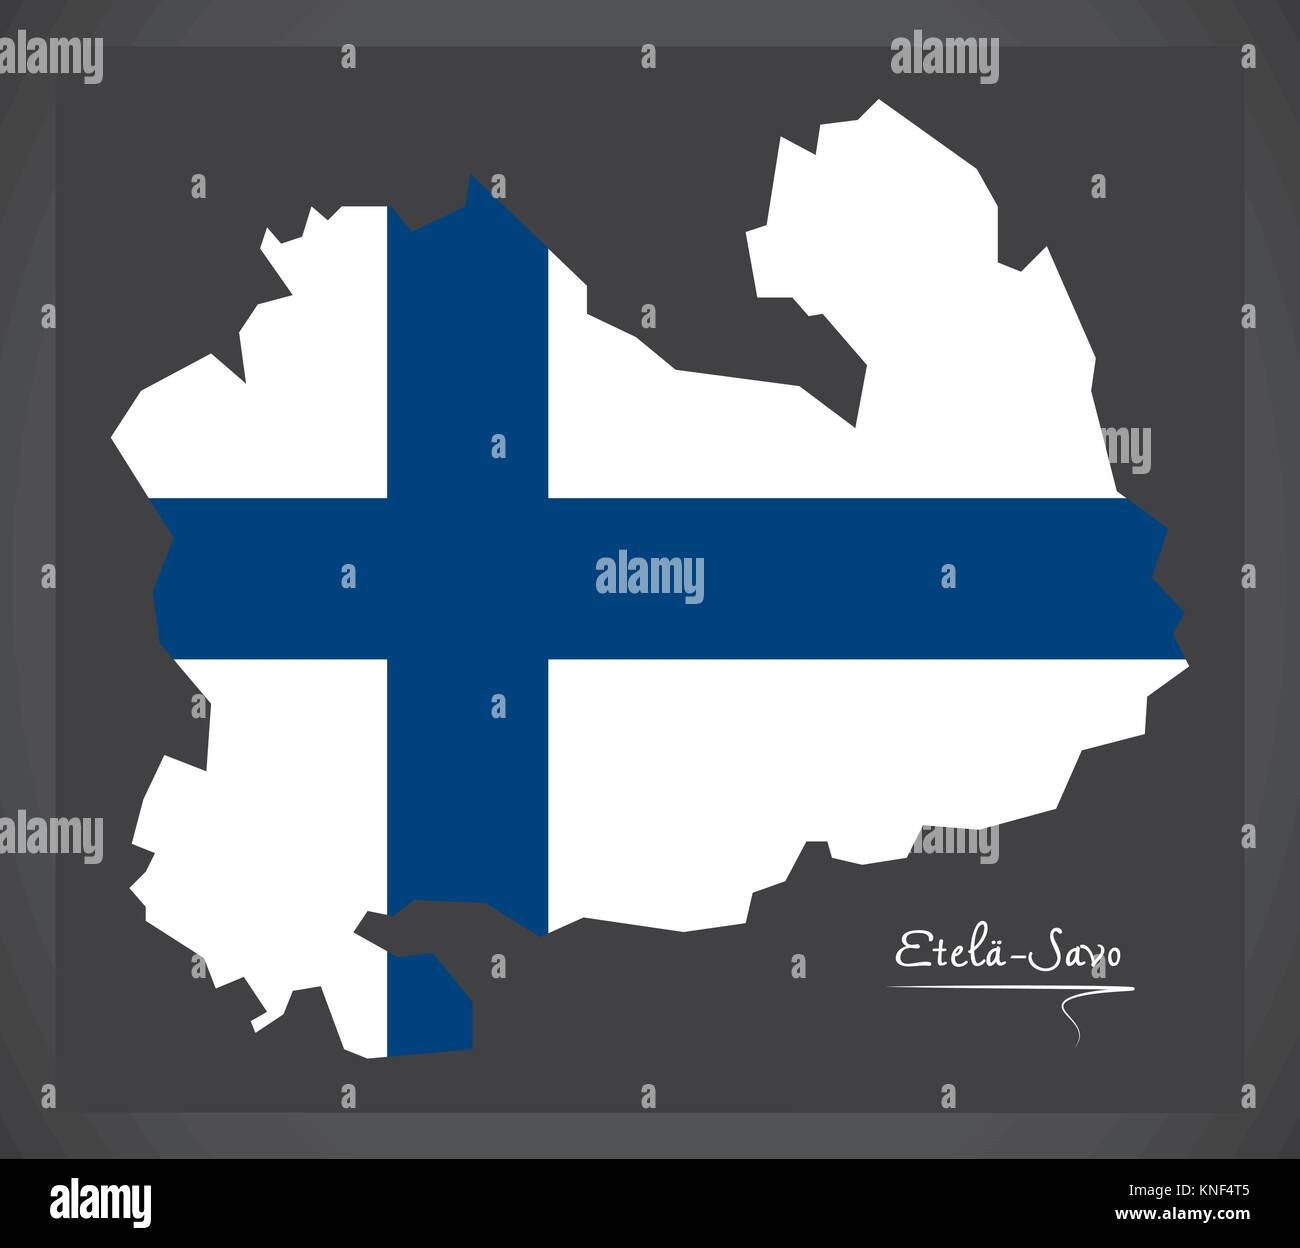 Etela-Savo map of Finland with Finnish national flag illustration Stock Vector